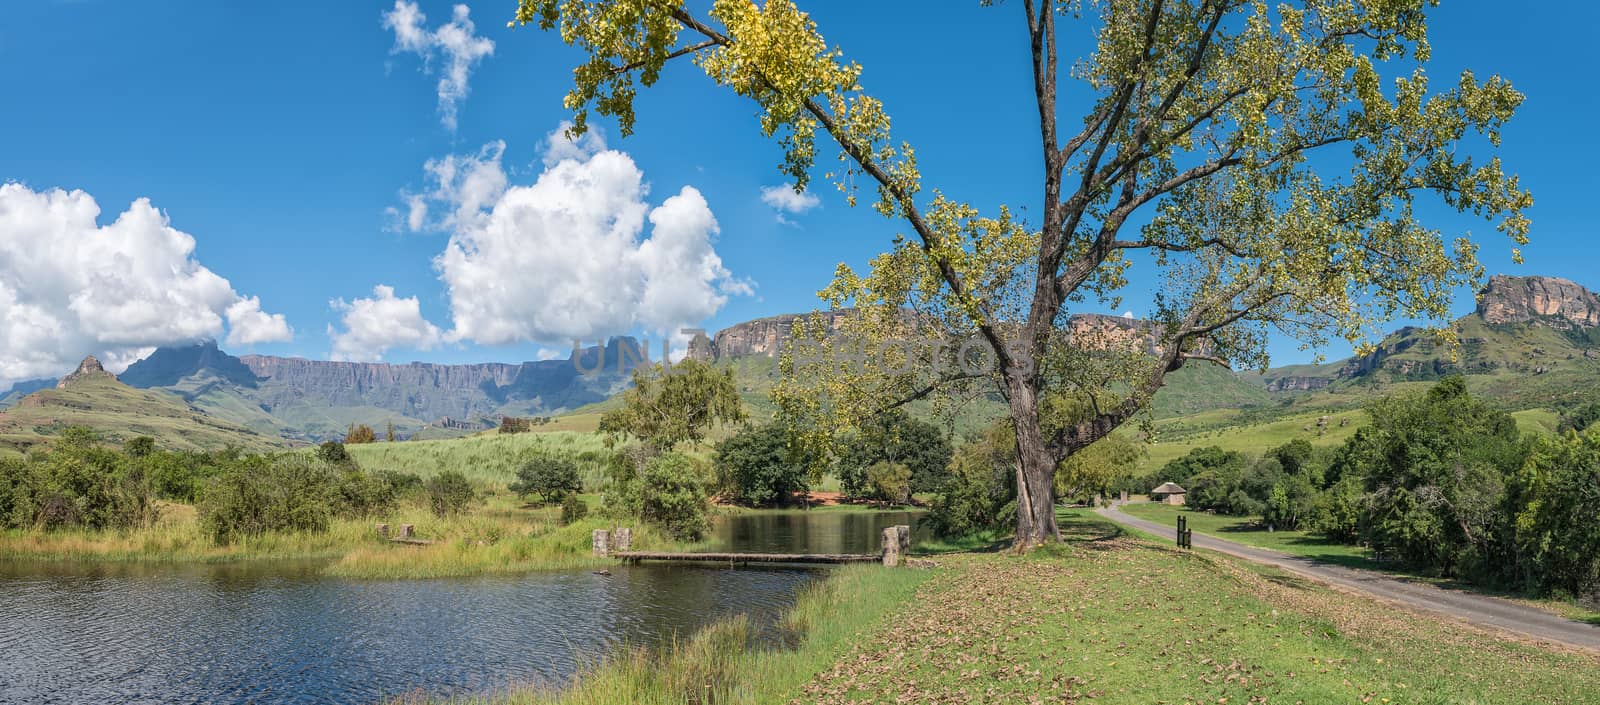 Trout pools next to the road to the start of the Tugela Gorge hiking trail. The Amphitheatre is visible in the back